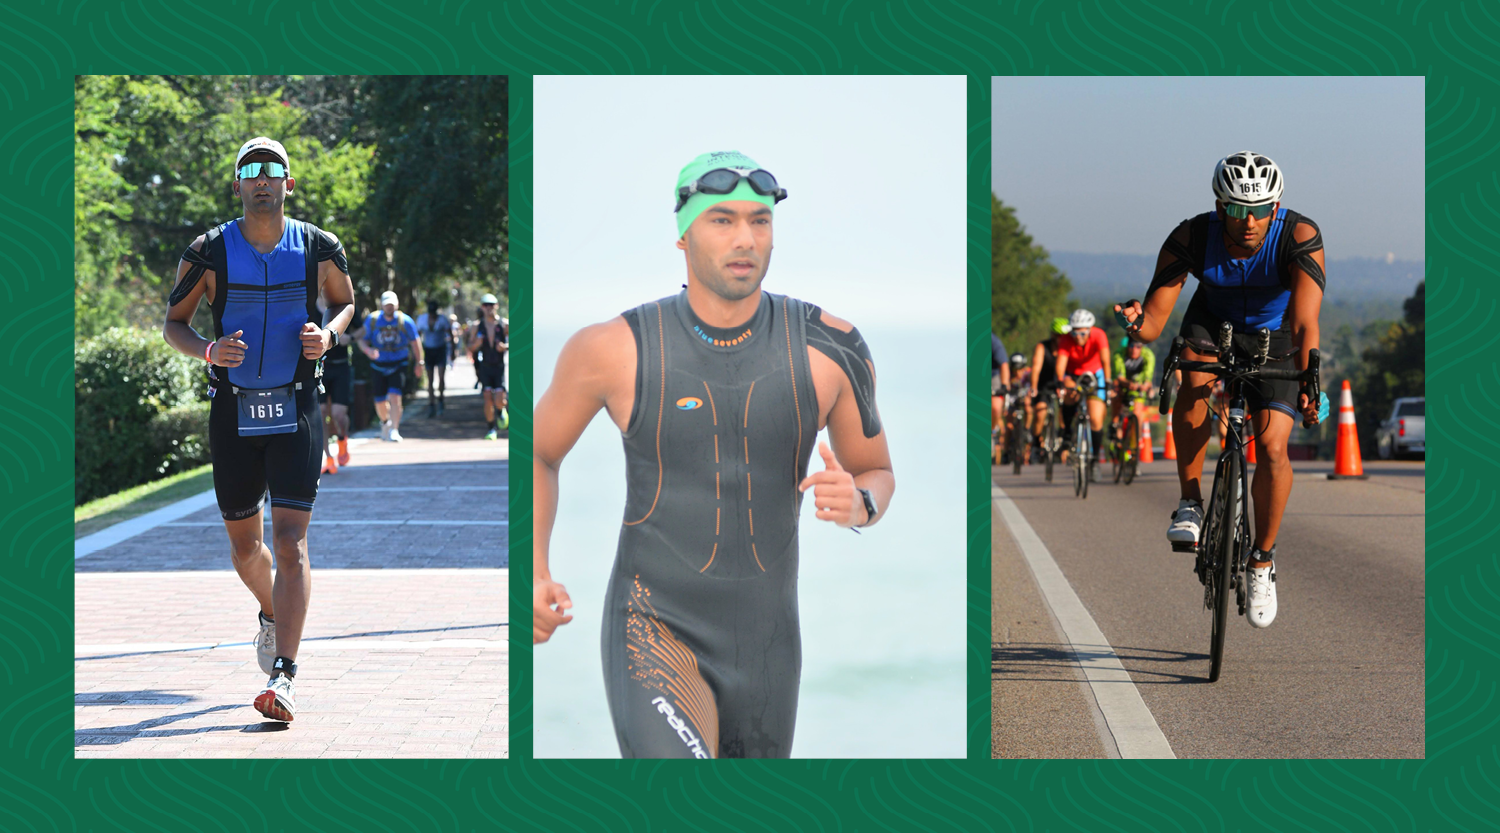 Indian alumnus, Aditya Sharma is displayed in three pictures from a triathalon - running, swimming, and biking